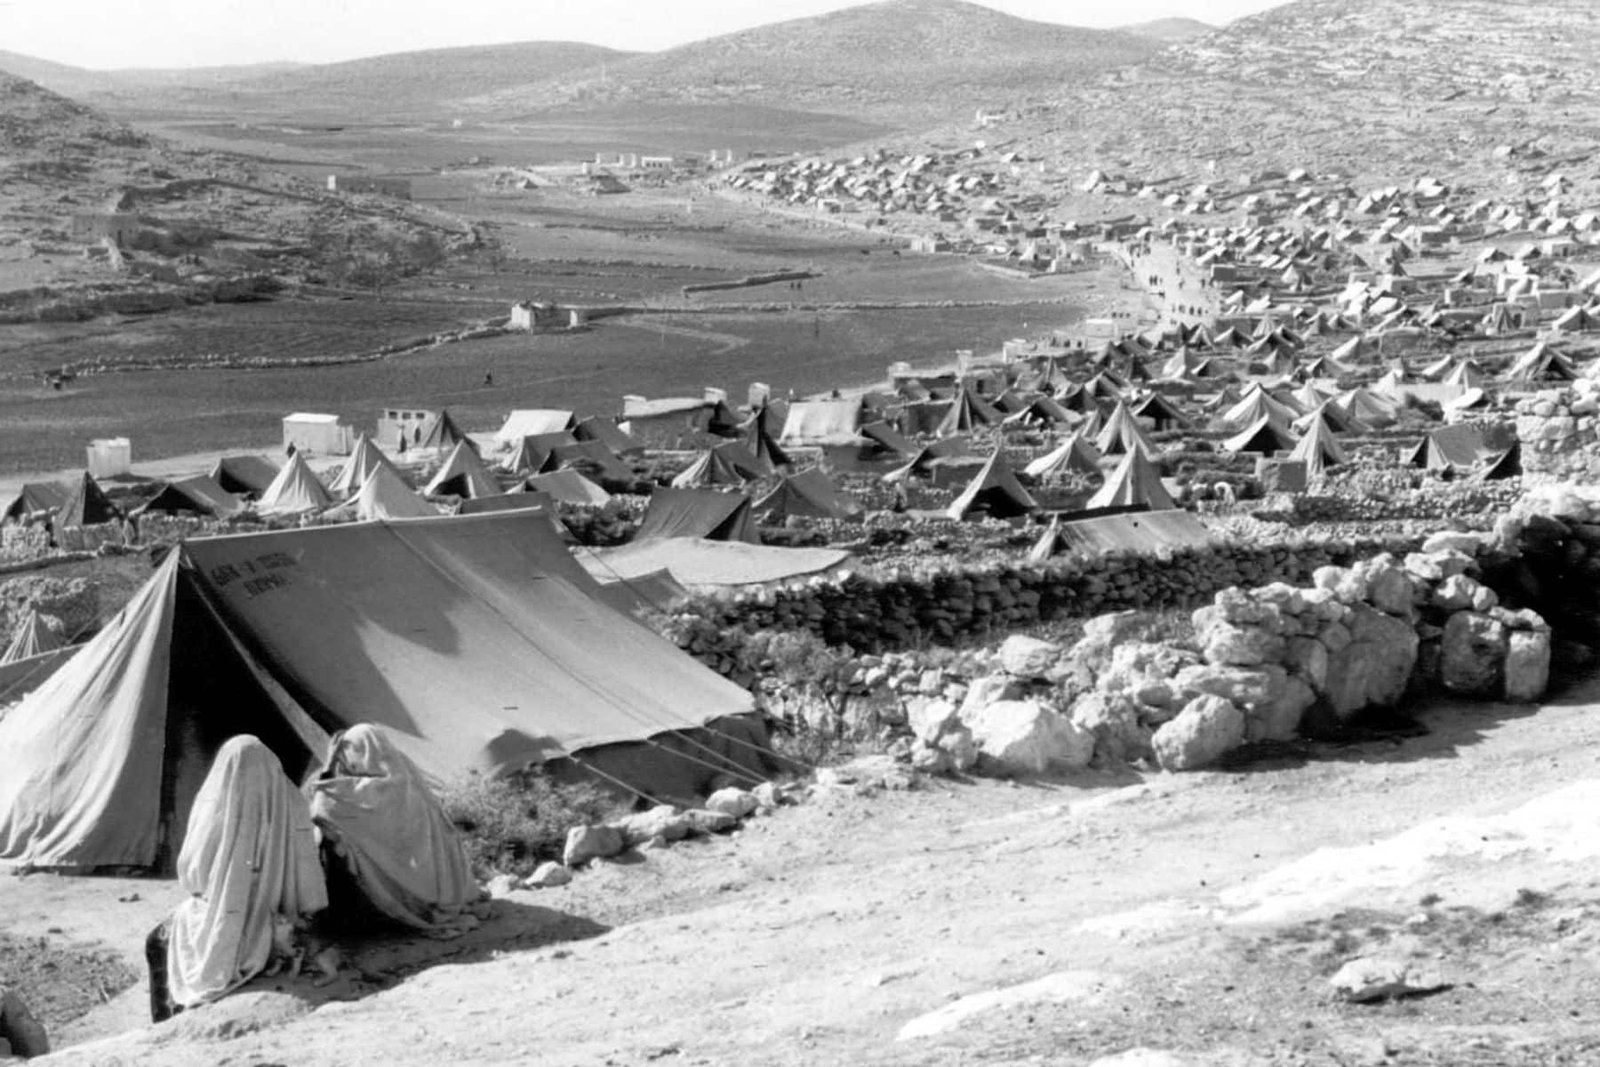 The 1948 Palestinian exodus, known in Arabic as the Nakba (Arabic: an-Nakbah, lit.'catastrophe'), occurred when more than 700,000 Palestinian Arabs fled or were expelled from their homes, during the 1947–1948 Civil War in Mandatory Palestine and the 1948 Arab–Israeli War.

The exact number of refugees is a matter of dispute, but around 80 percent of the Arab inhabitants of what became Israel (50 percent of the Arab total of Mandatory Palestine) left or were expelled from their homes.

Later in the war, Palestinians were forcibly expelled as part of 'Plan Dalet' in a policy of 'ethnic cleansing'.